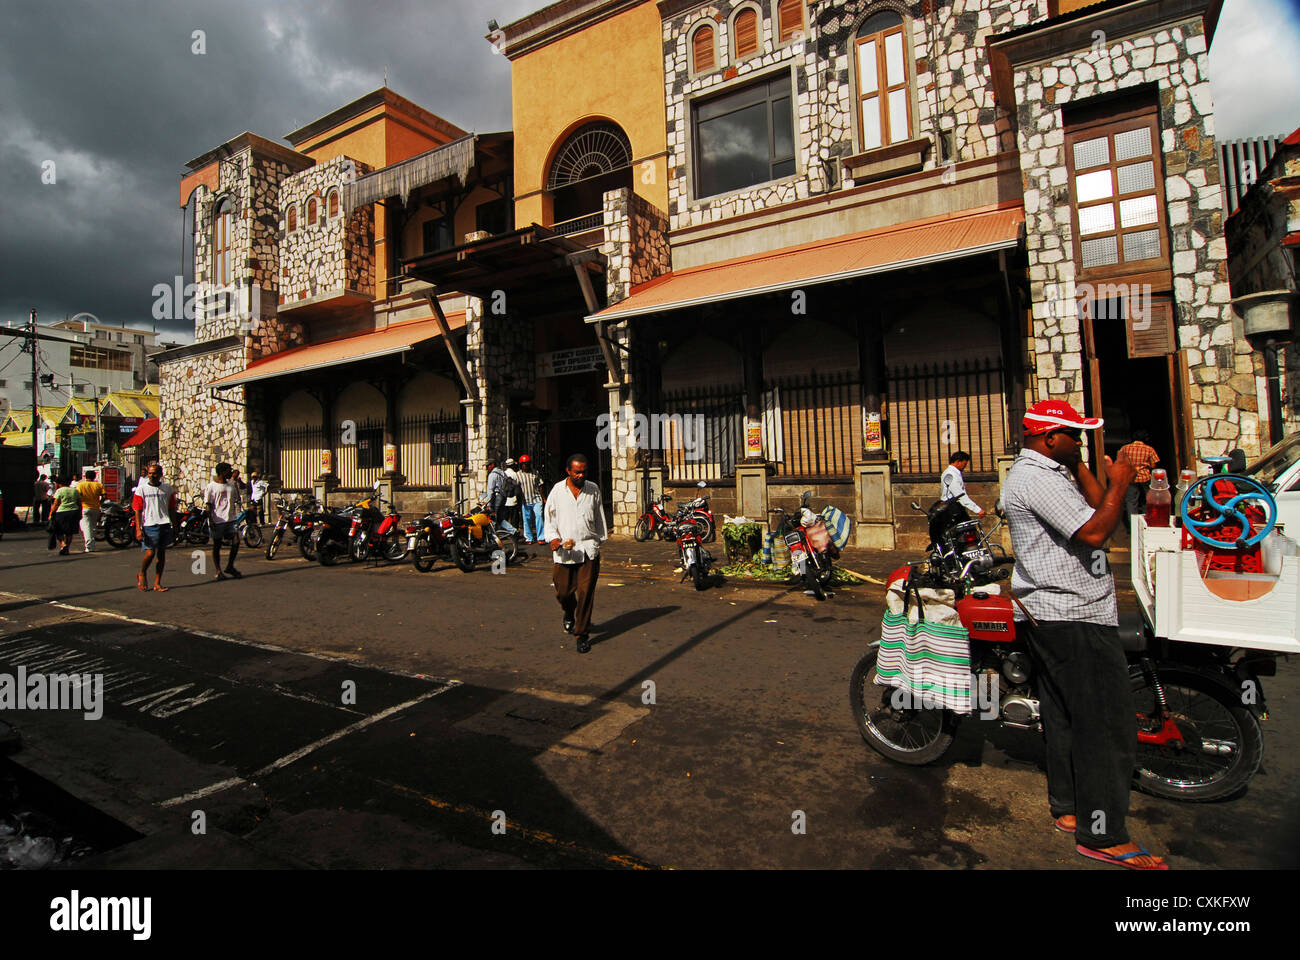 Mauritius, Port Louis, people on road with the view of vehicles parked in front of the building Stock Photo